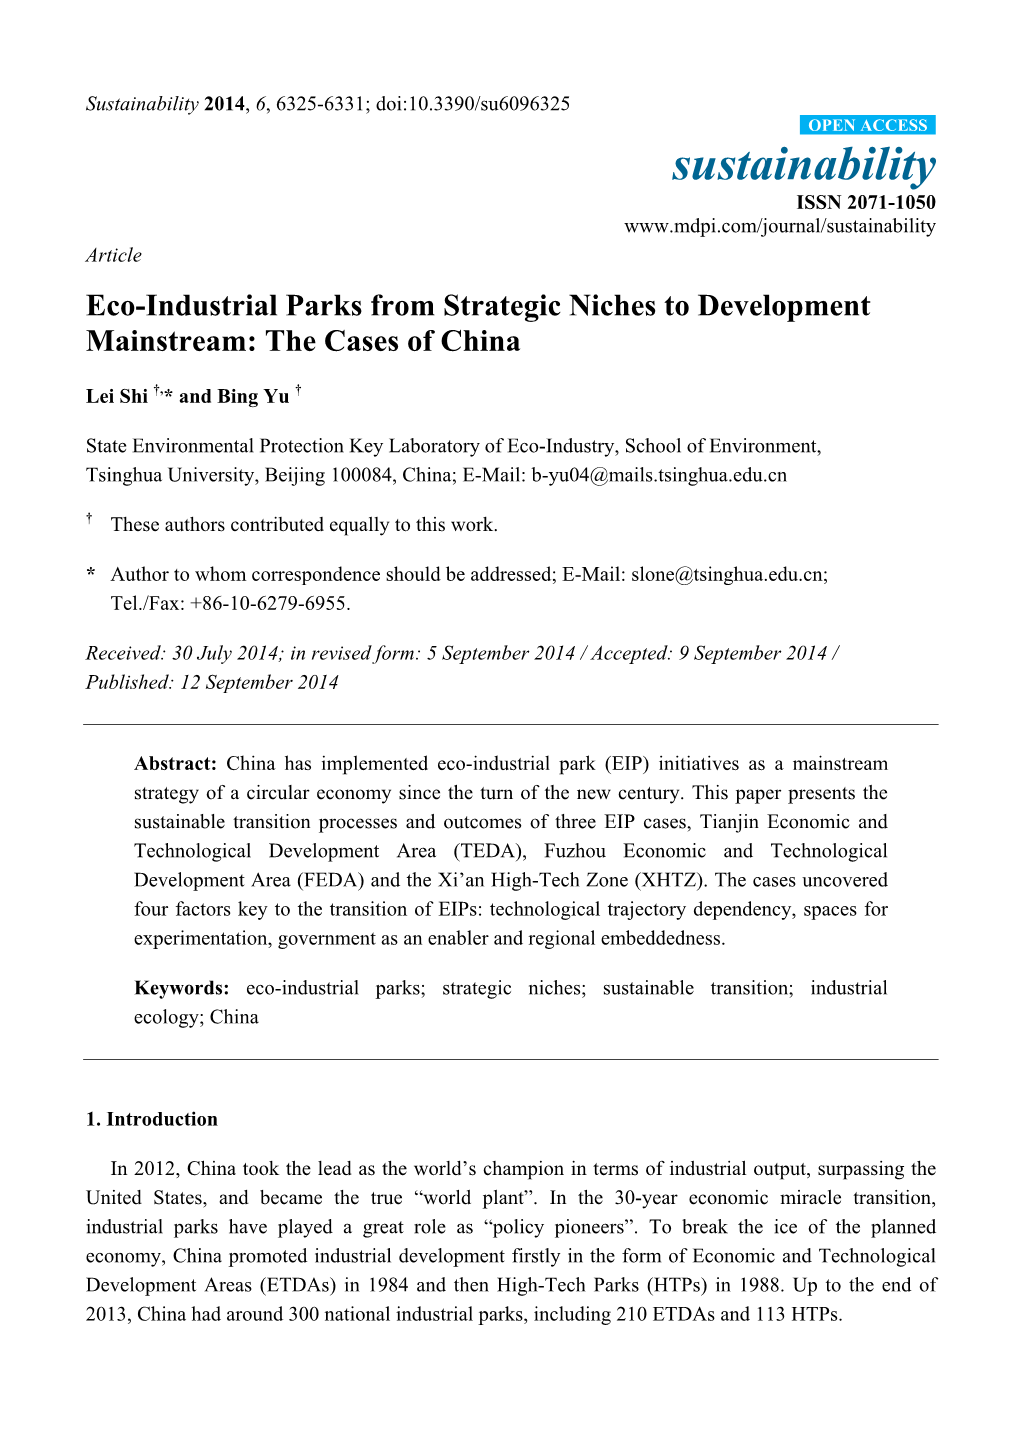 Eco-Industrial Parks from Strategic Niches to Development Mainstream: the Cases of China